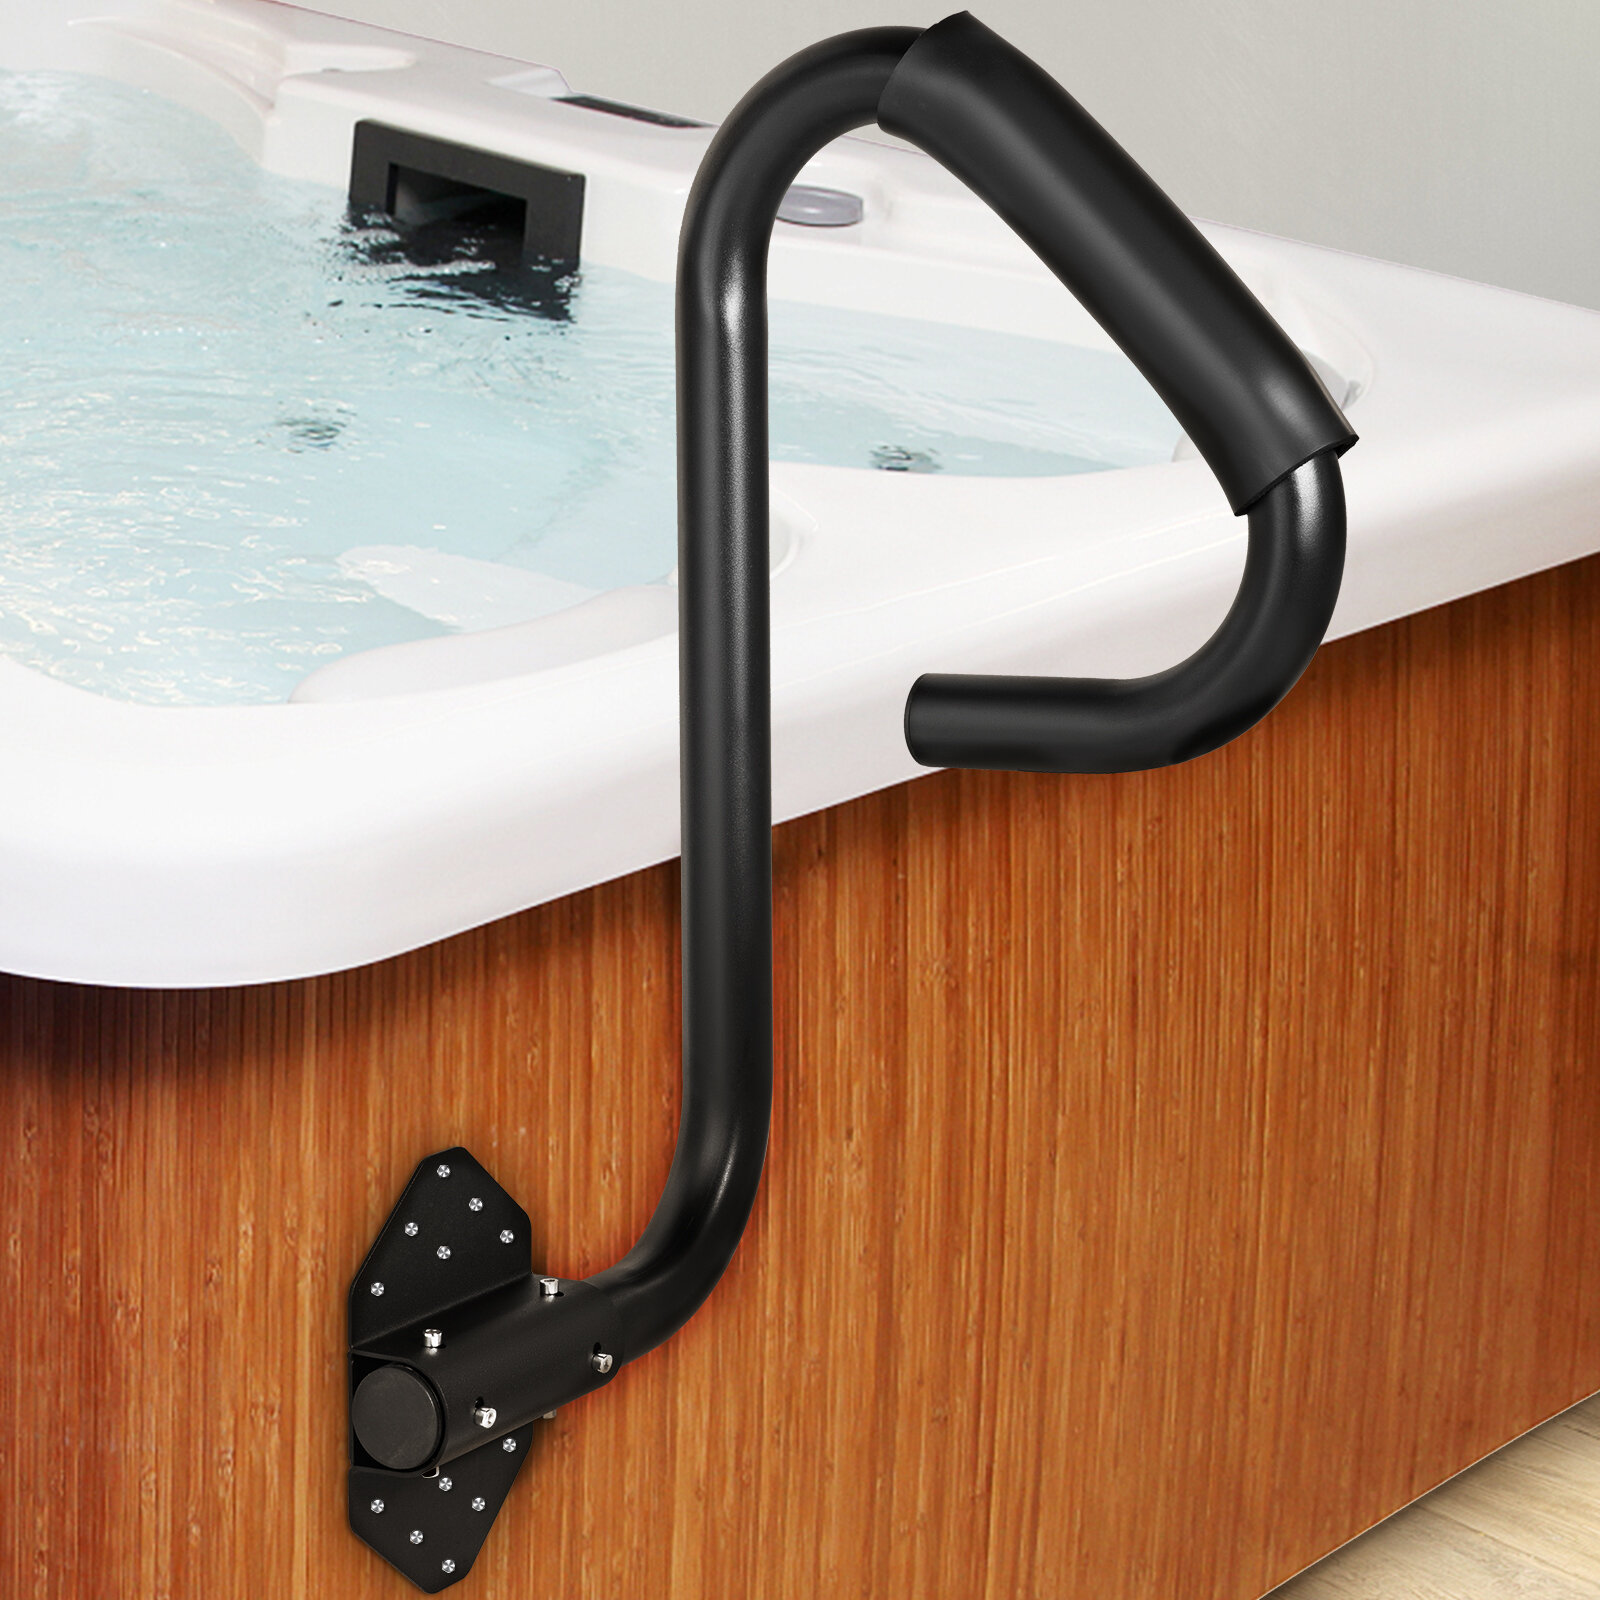 Details about   Spa Side Handrail Under mount style LED Hot Tubs Hand Rail Cover Valet 